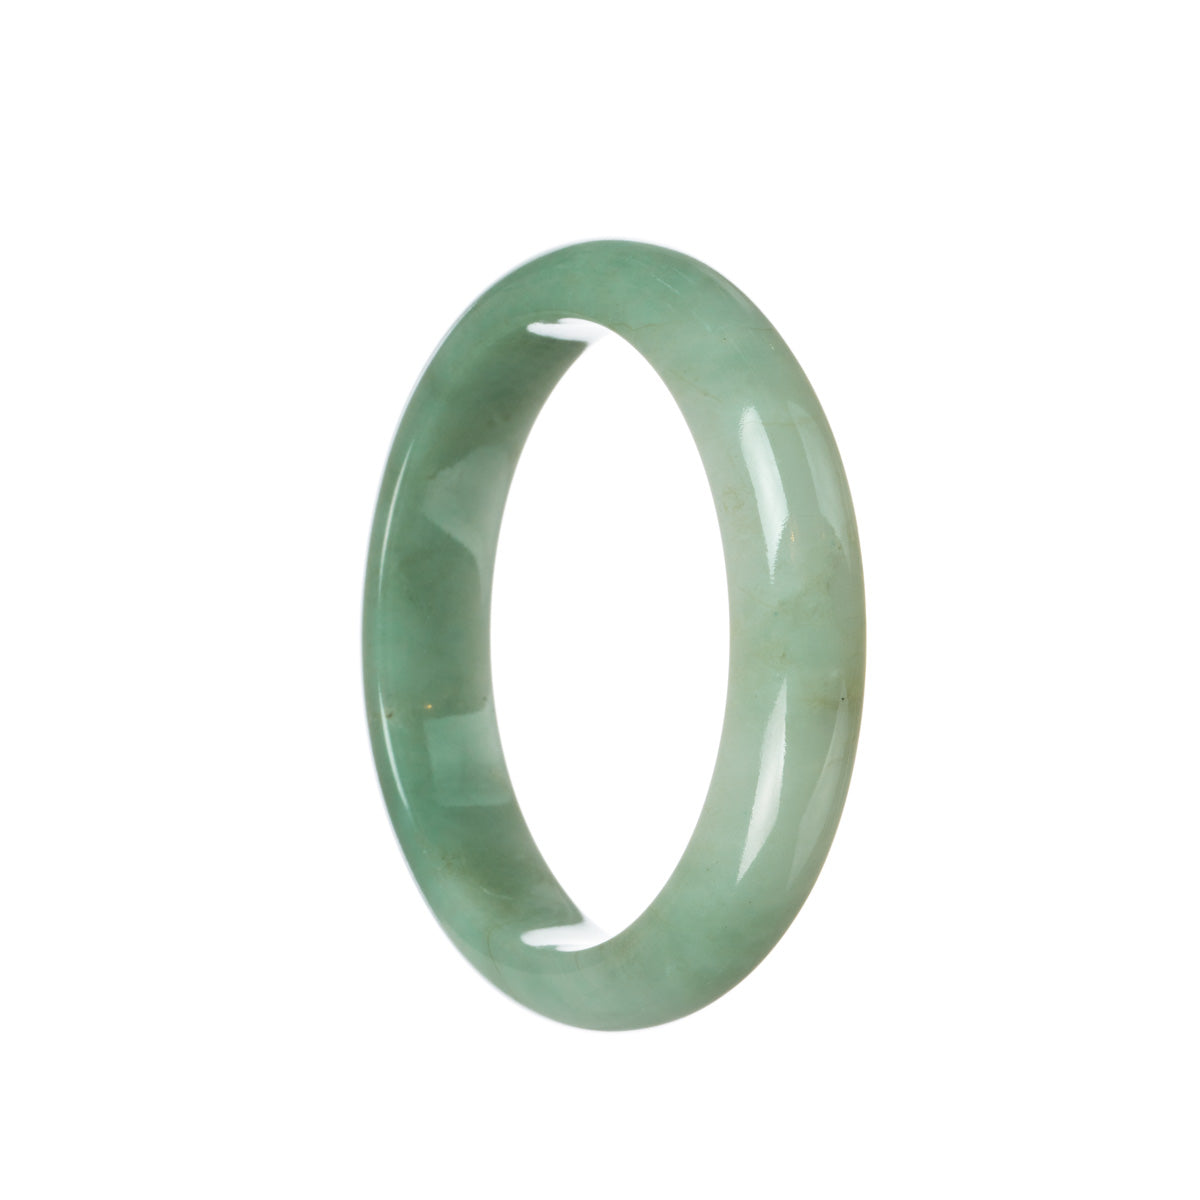 A beautiful green jade bangle with a semi-round shape, measuring 59mm in size. Perfect for adding a touch of elegance to any outfit.